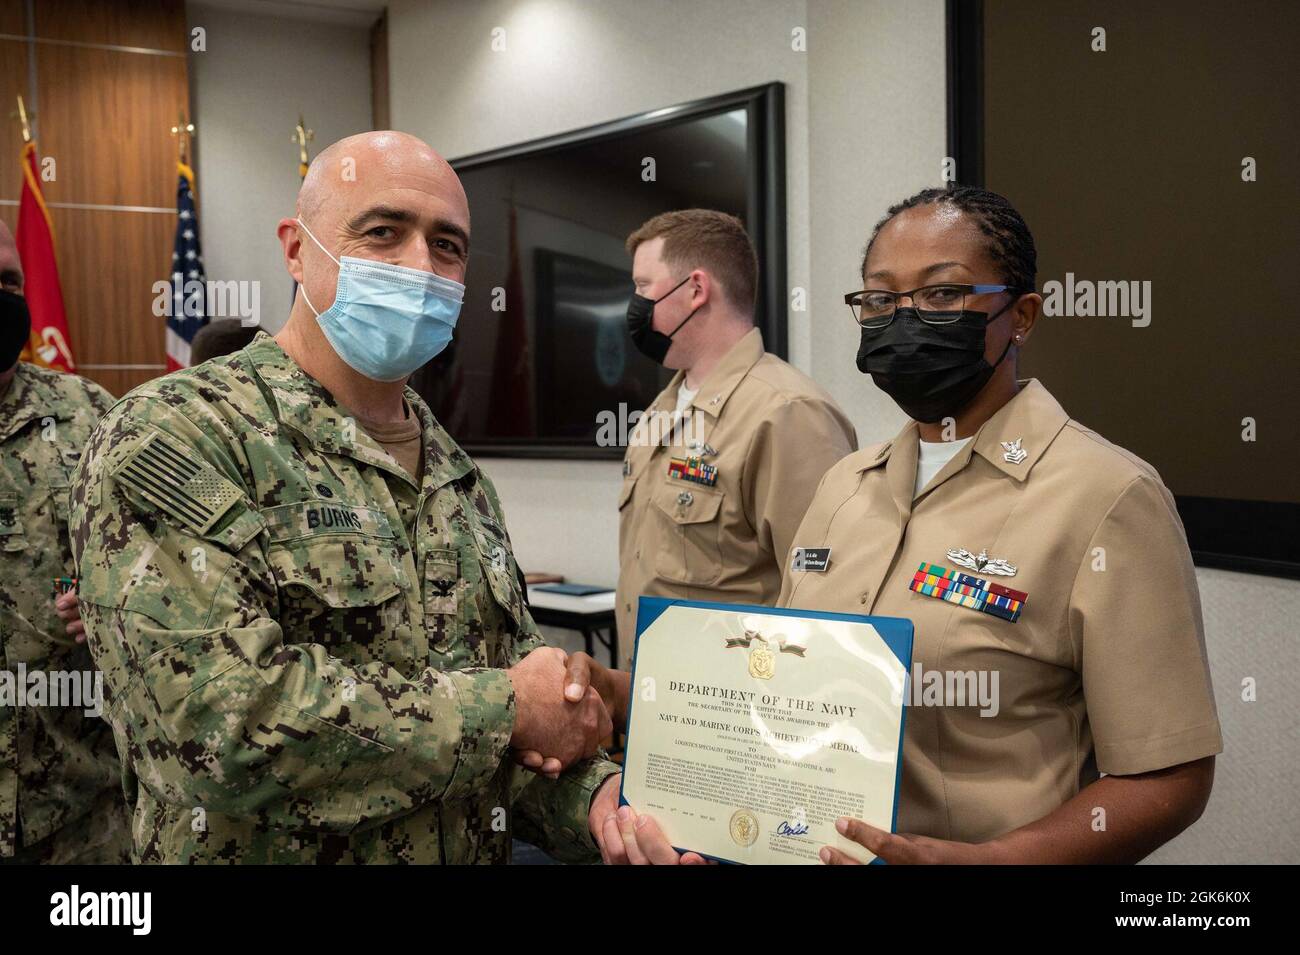 WASHINGTON, DC (Aug. 16, 2021) – Capt. Mark Burns (left), Naval Support Activity Washington commanding officer, presents Logistic Specialist 1st Class Otini Abu (right) with a Navy and Marine Corps achievement medal during an award ceremony held onboard Washington Navy Yard. Stock Photo